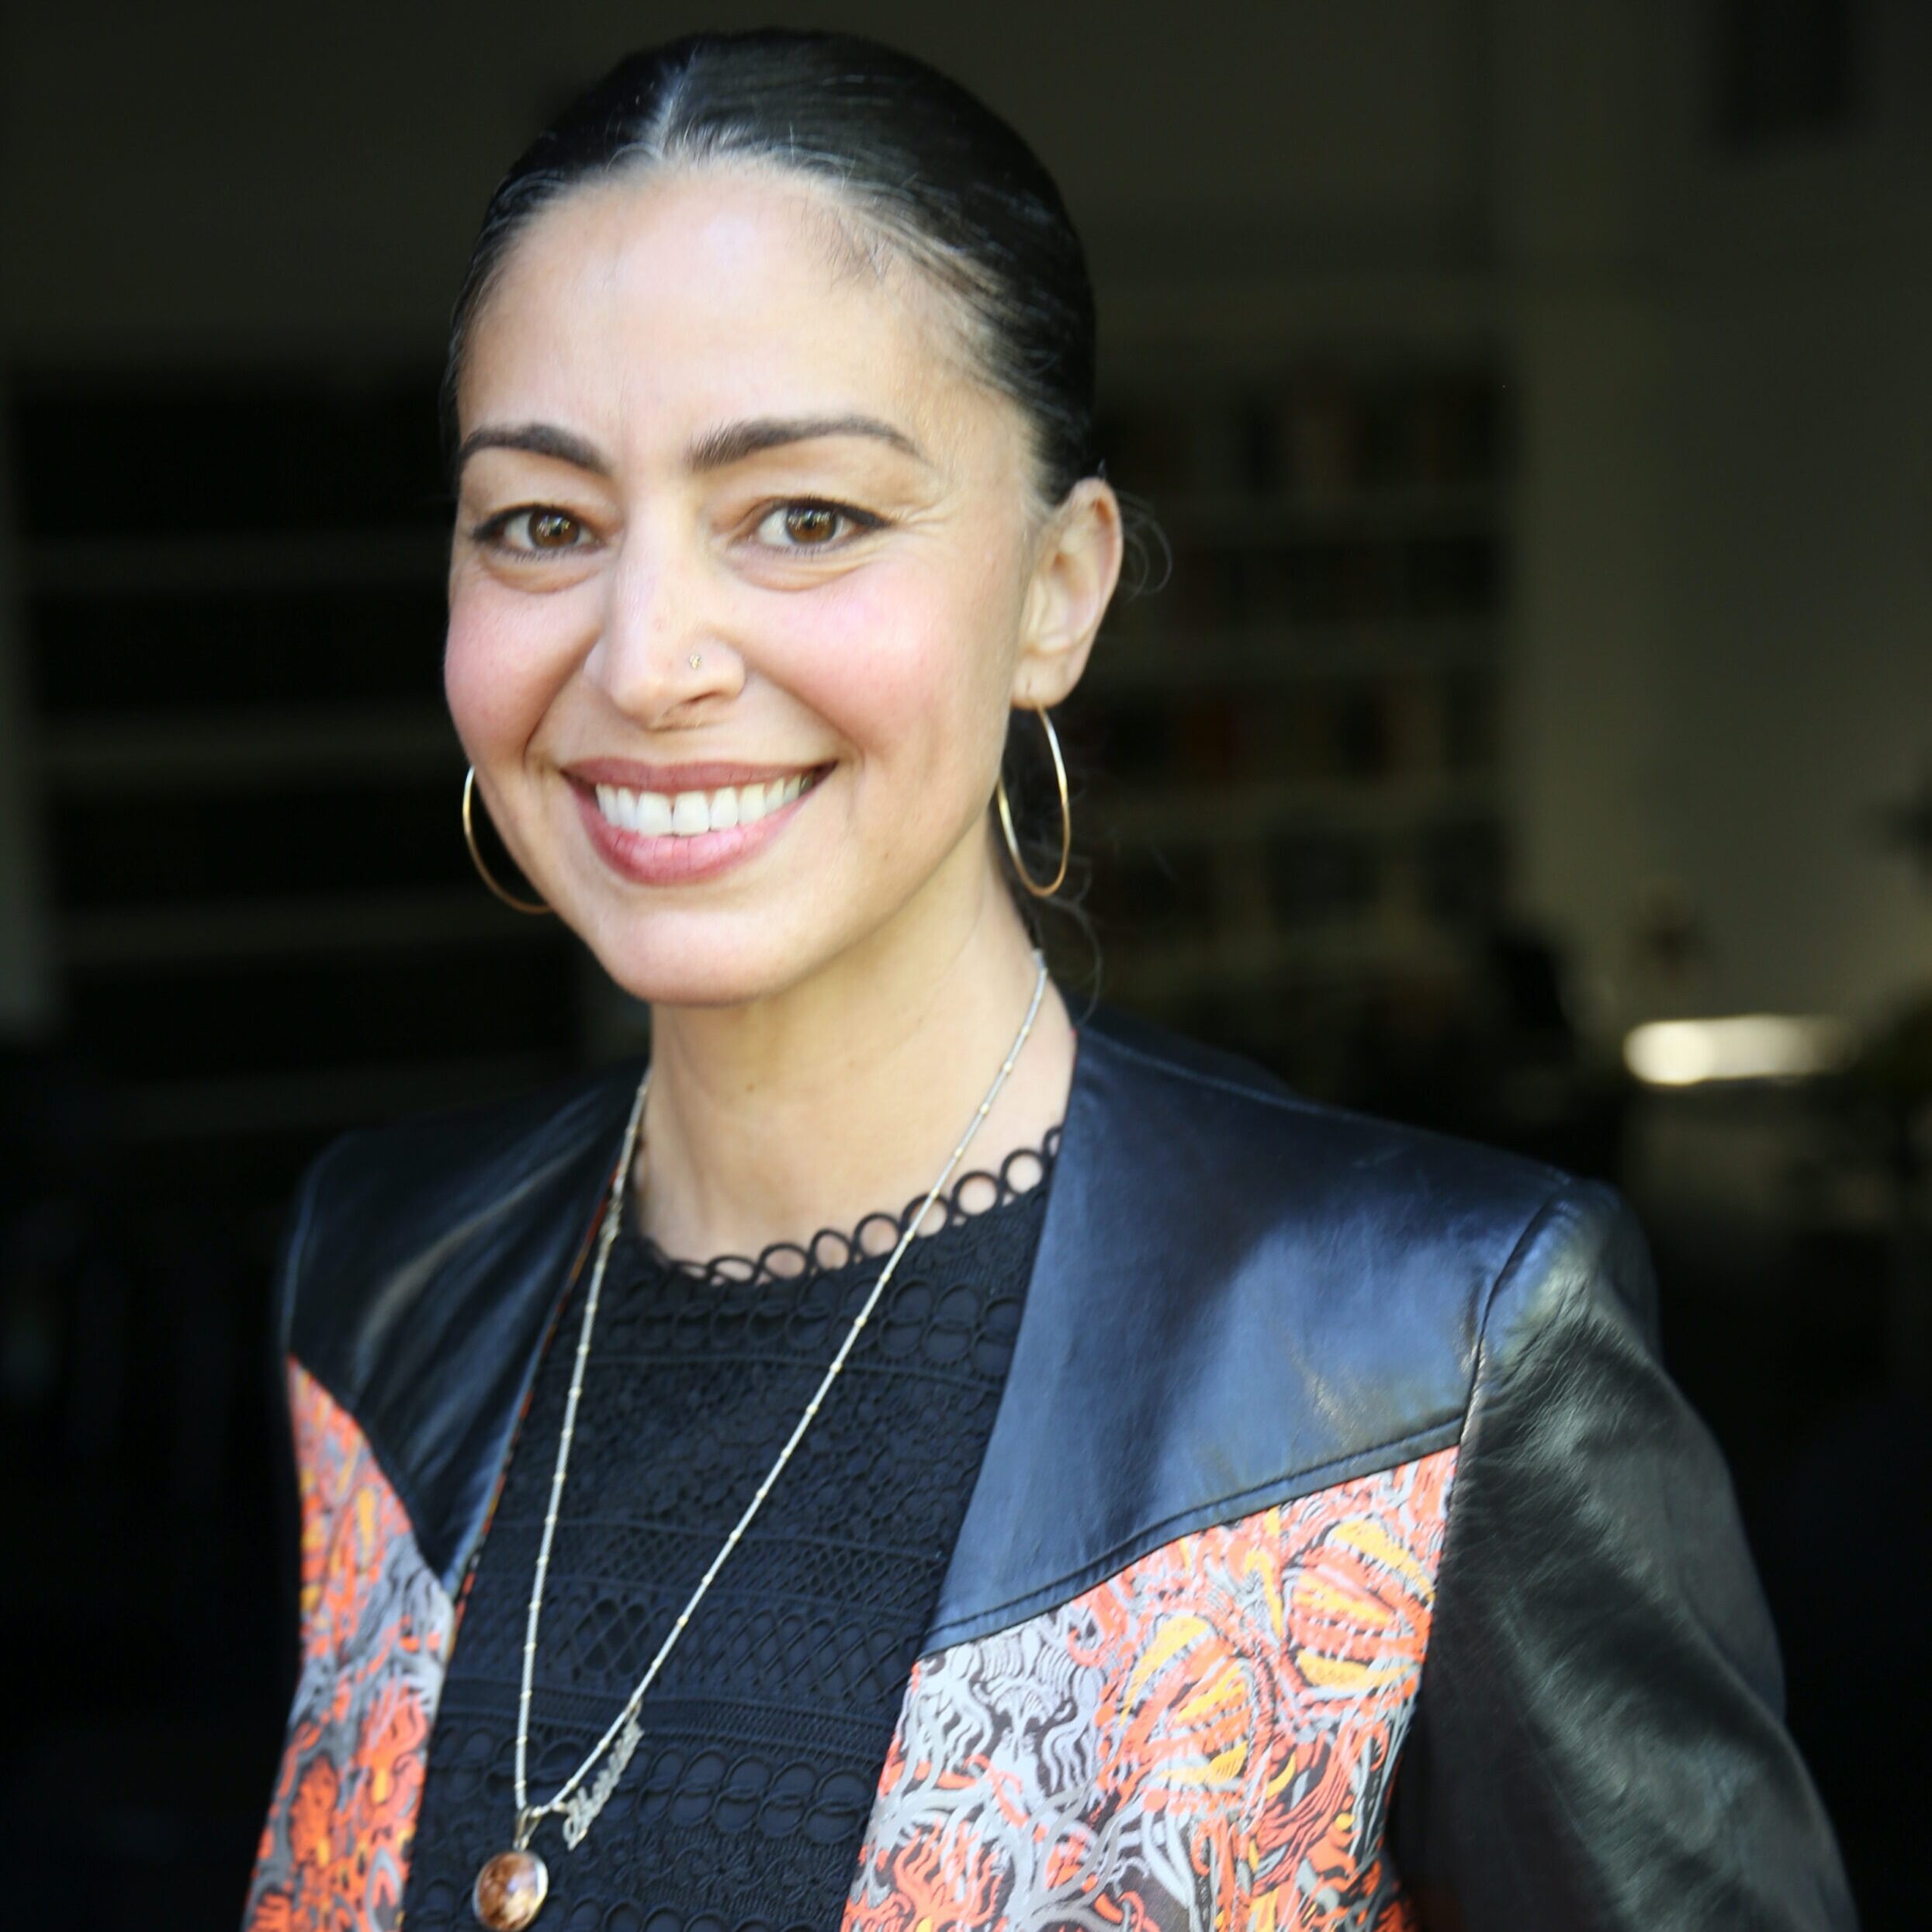 A woman with dark hair pulled back, wearing hoop earrings, a black top with intricate patterns, and a black jacket with colorful textured detail on the shoulders. Shereen Marisol Meraji is smiling and standing indoors against a dark, blurred background.